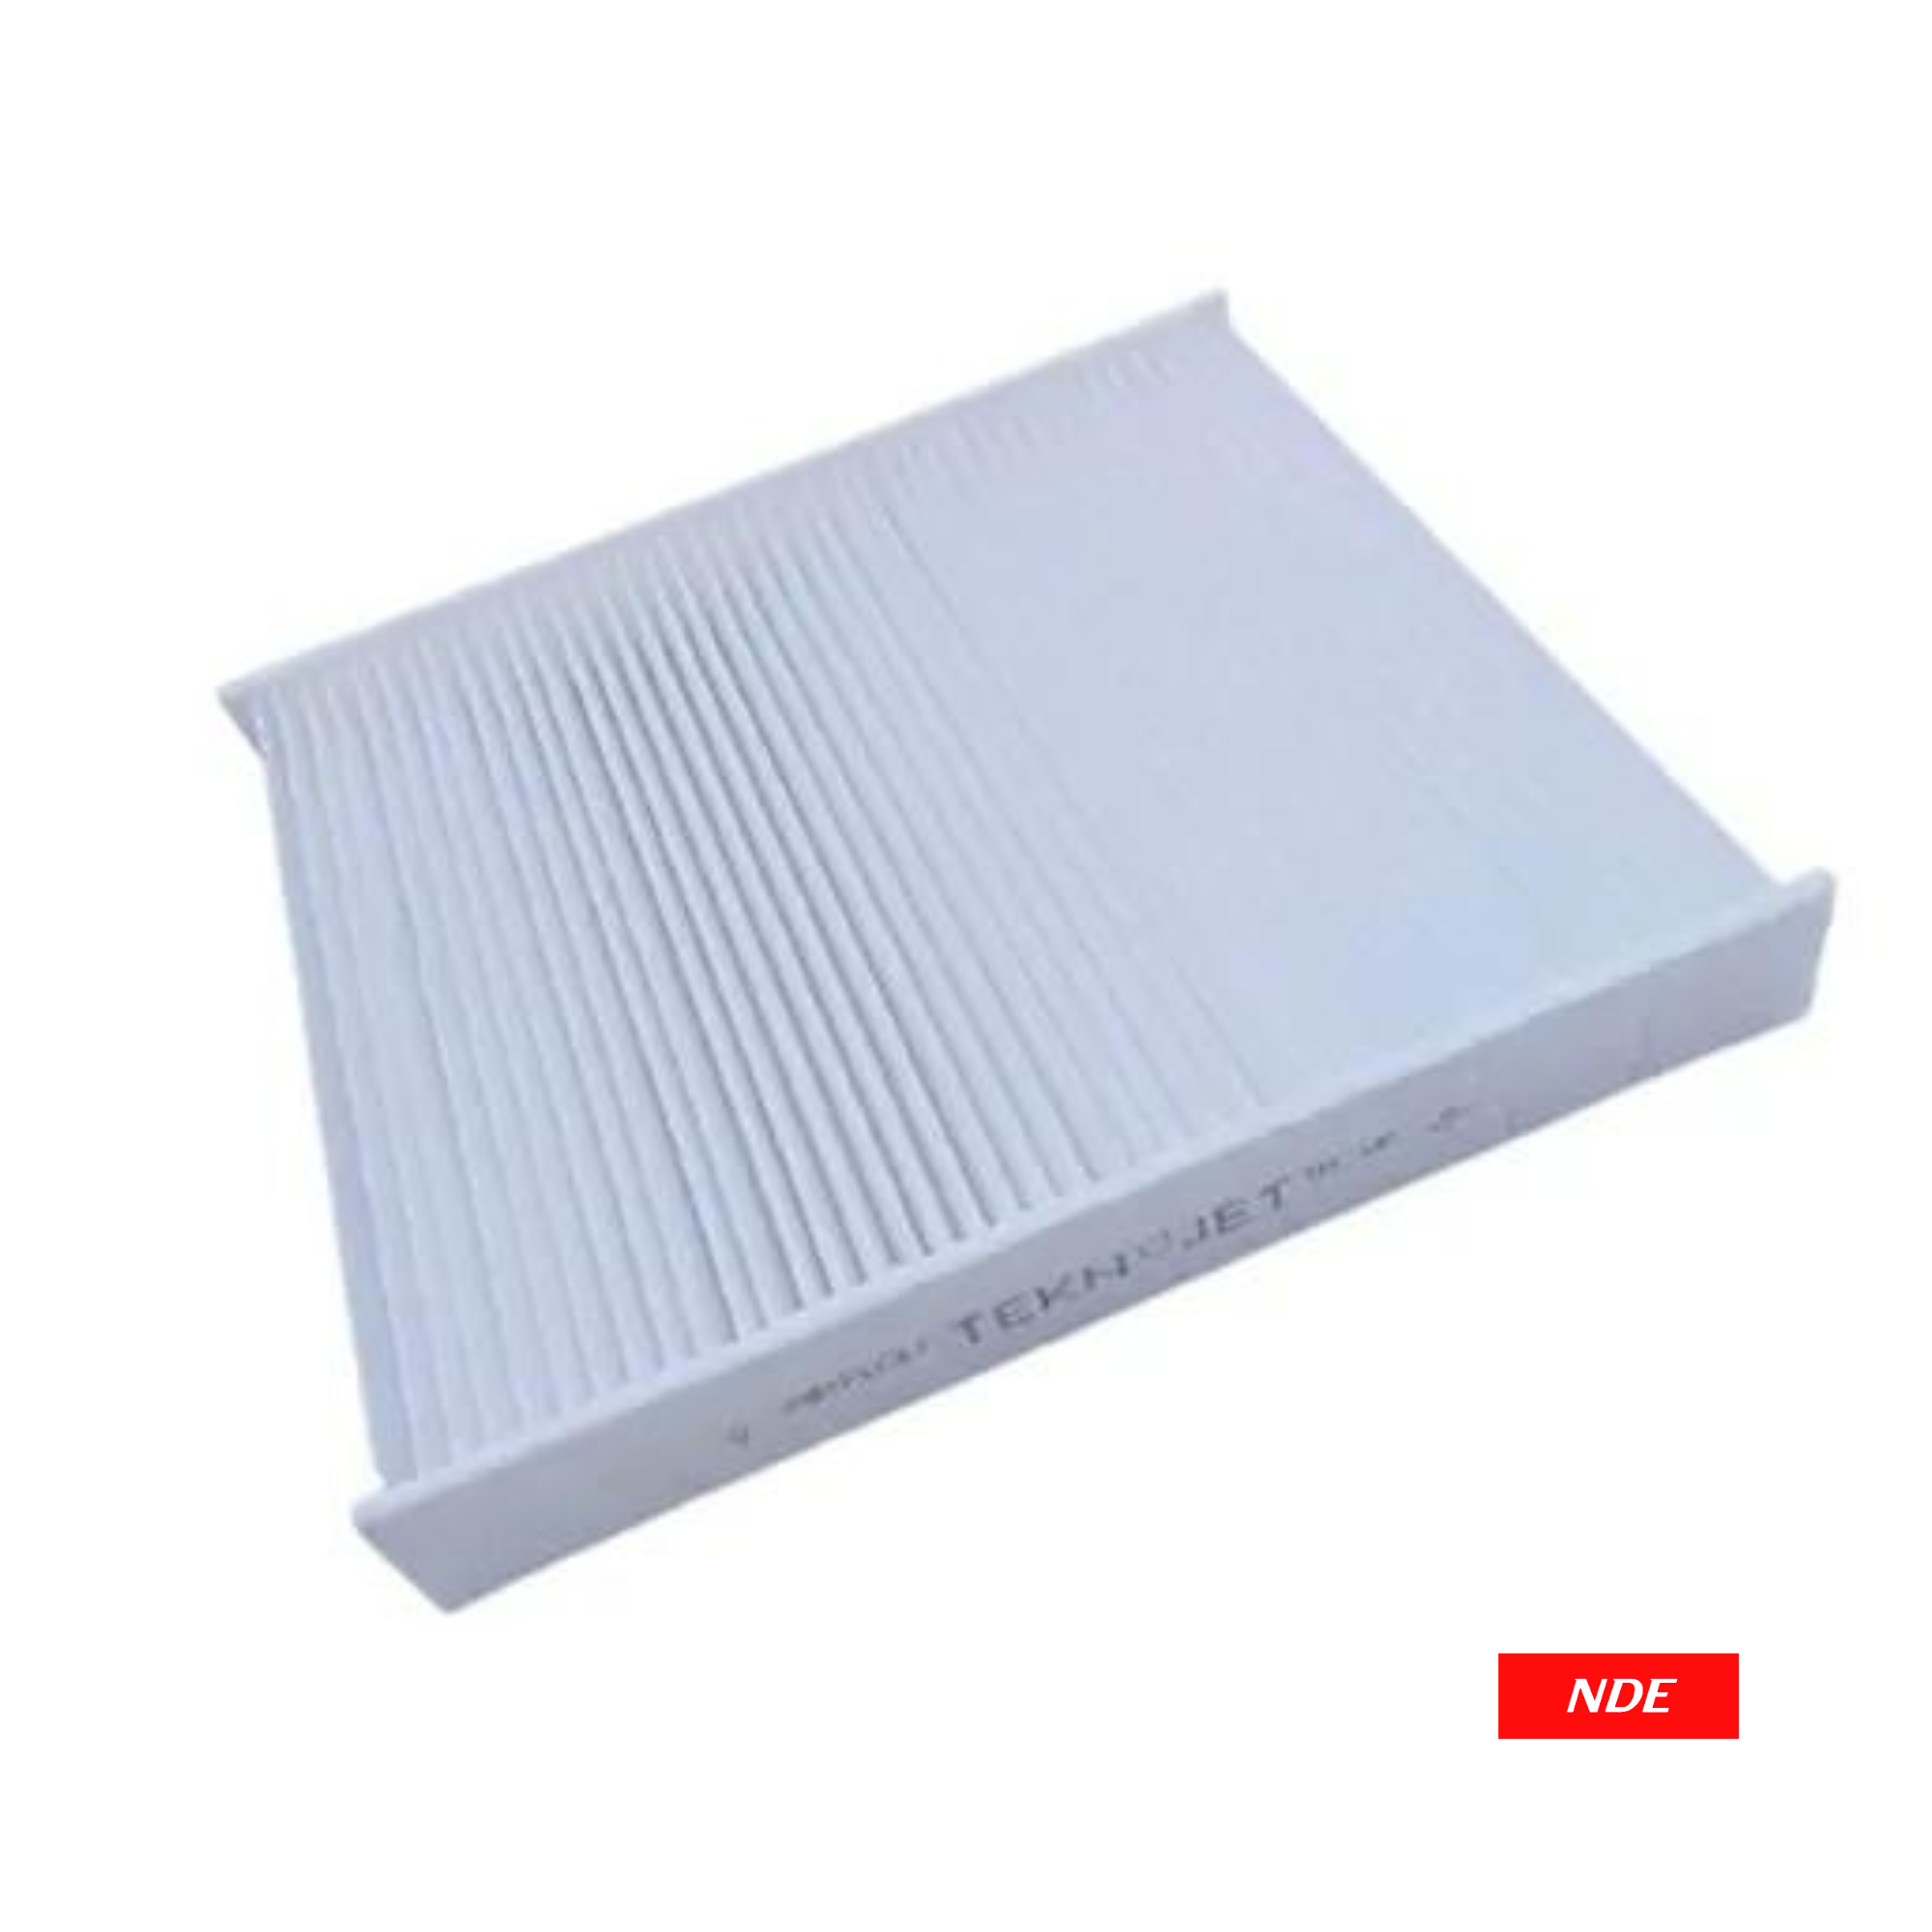 CABIN AC FILTER FOR CHANGAN ALSVIN (IMPORTED)